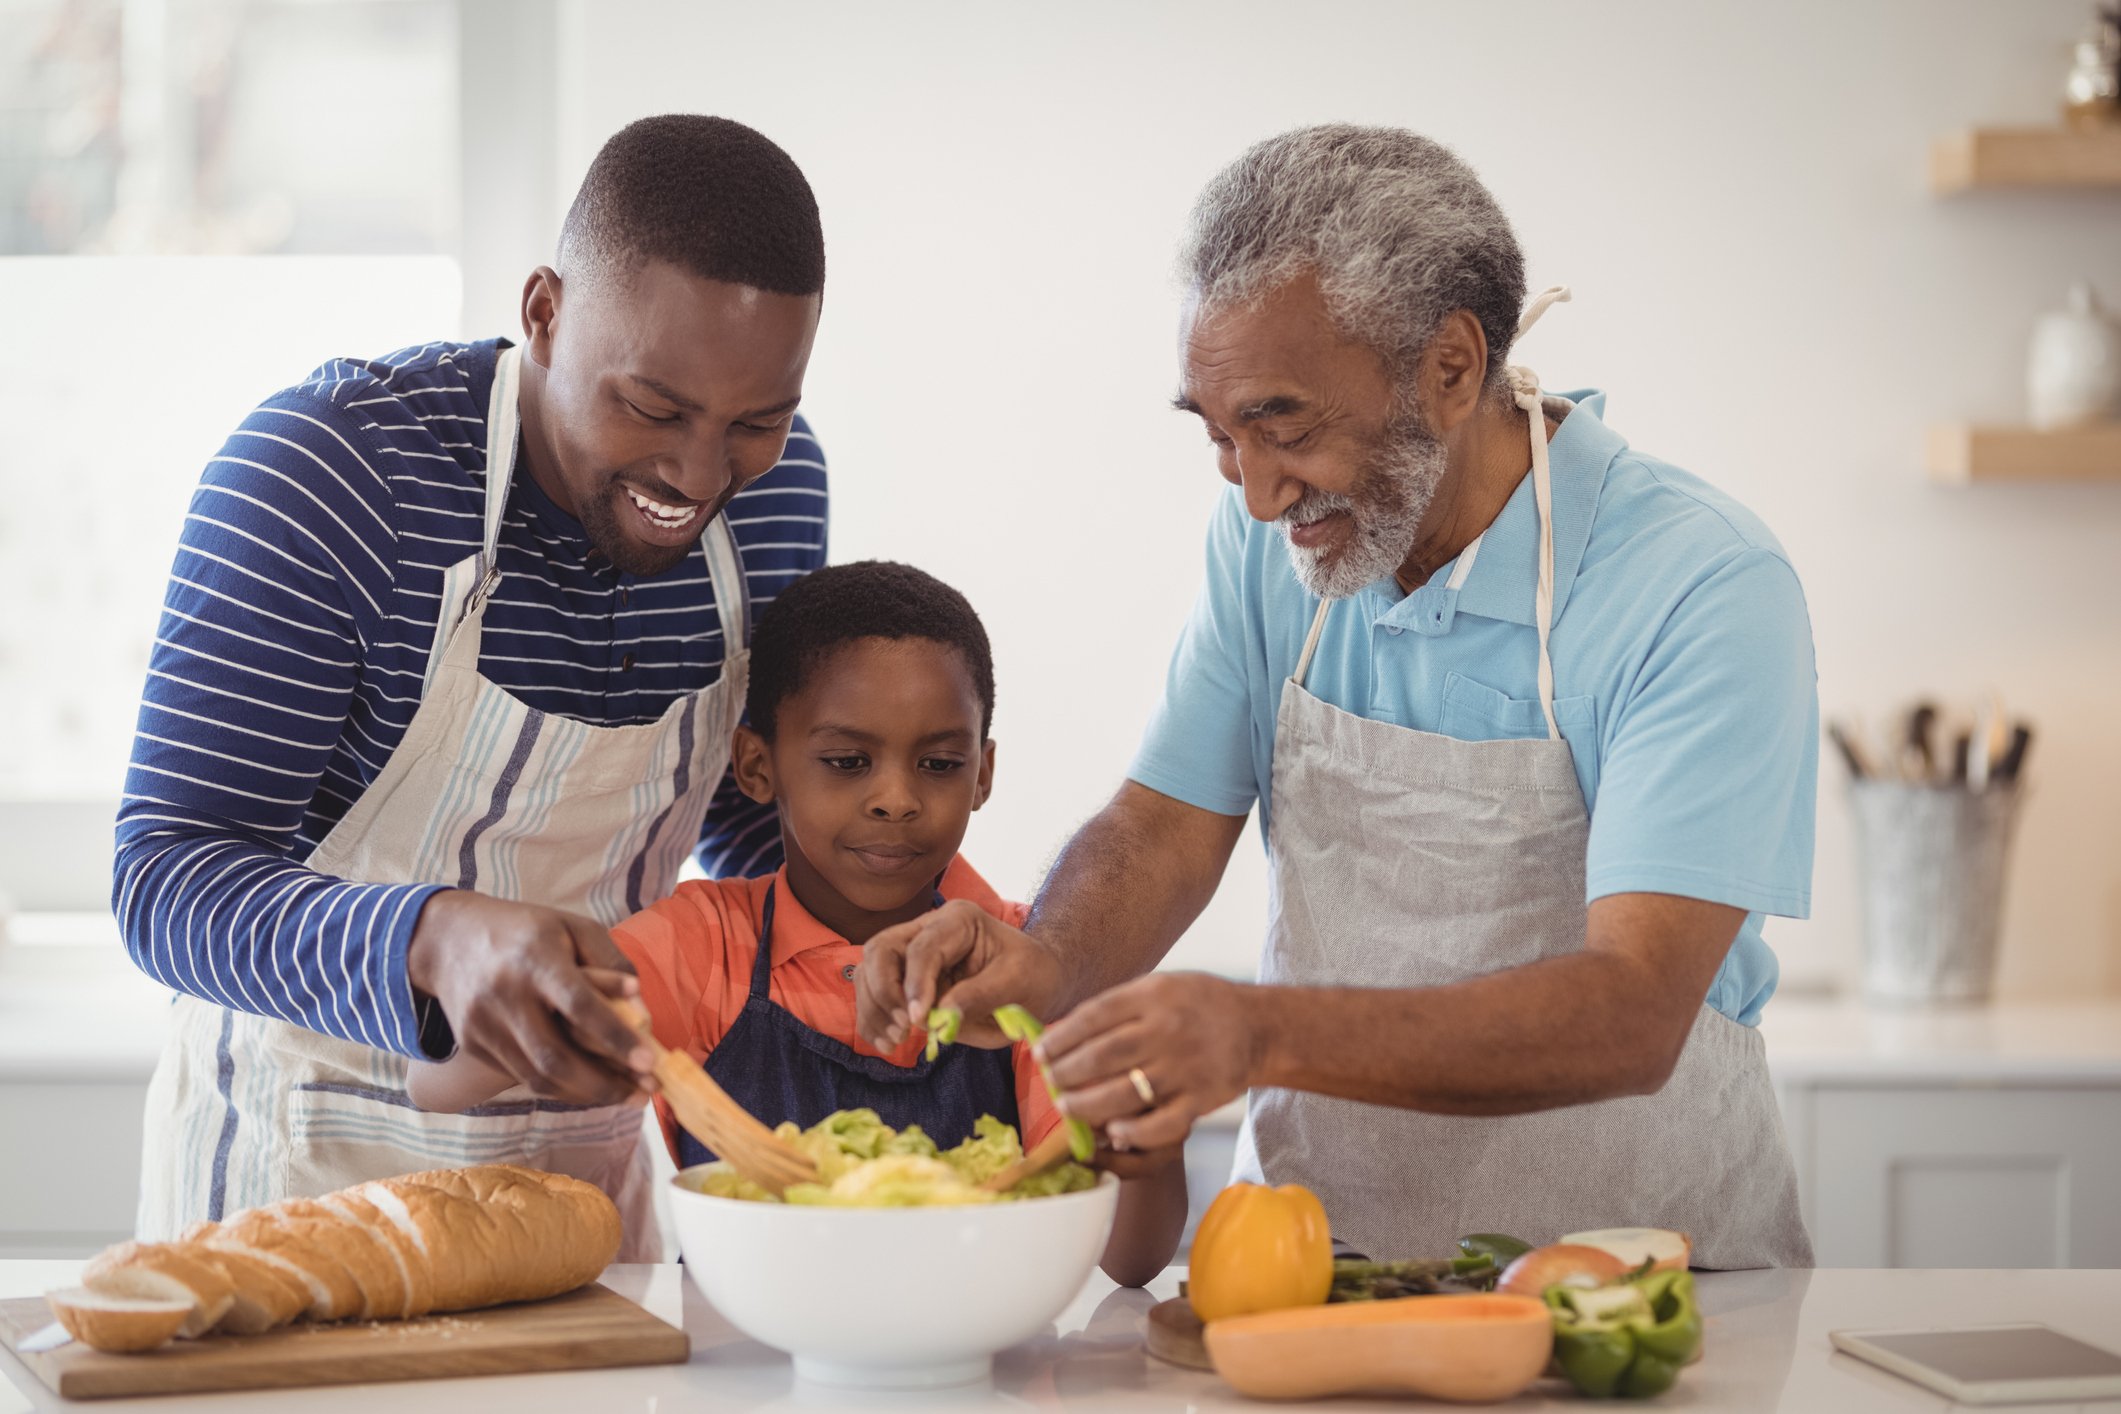 Younger man, older man and child prepare meal in kitchen.